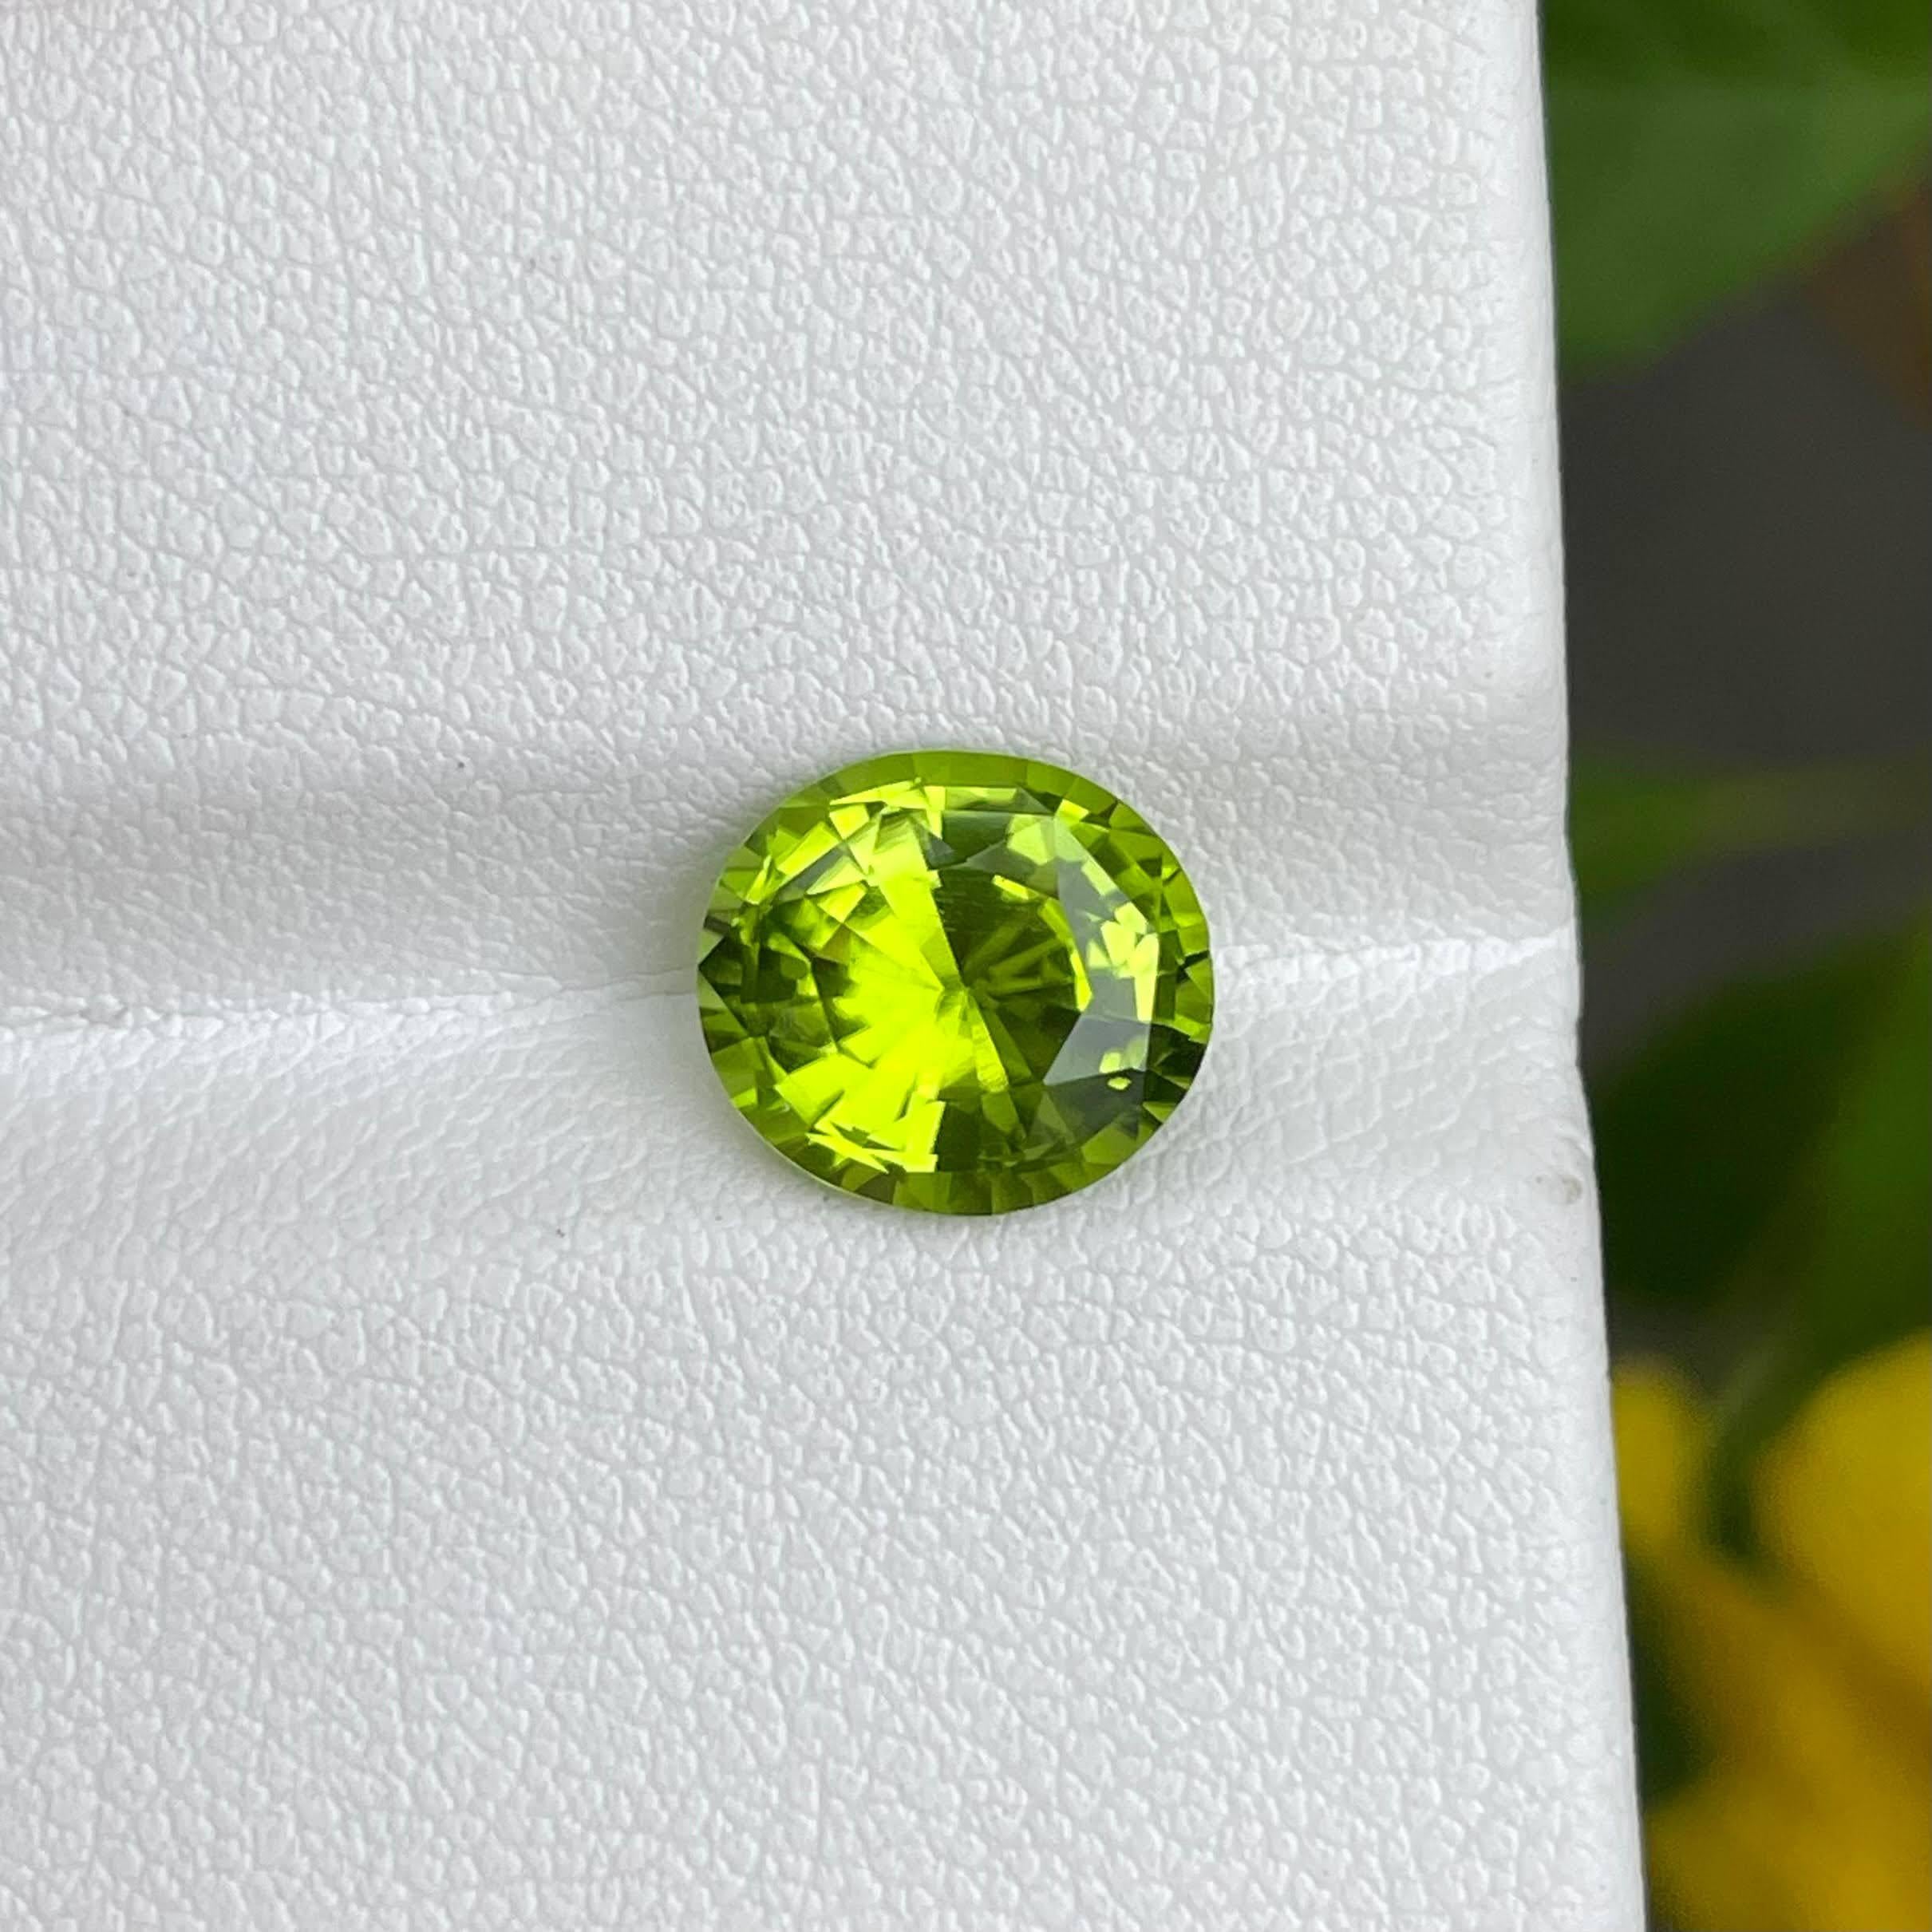 Weight : 3.0 carats 
Dimensions: 9.8x8.8x5.6 mm
Clarity: Clean
Origin: Pakistan
Treatment: None
Shape Oval
Cut Mix Oval





The exquisite beauty of this 3.00 carat Green Peridot Stone is truly captivating, showcasing a Mix Oval Cut that enhances